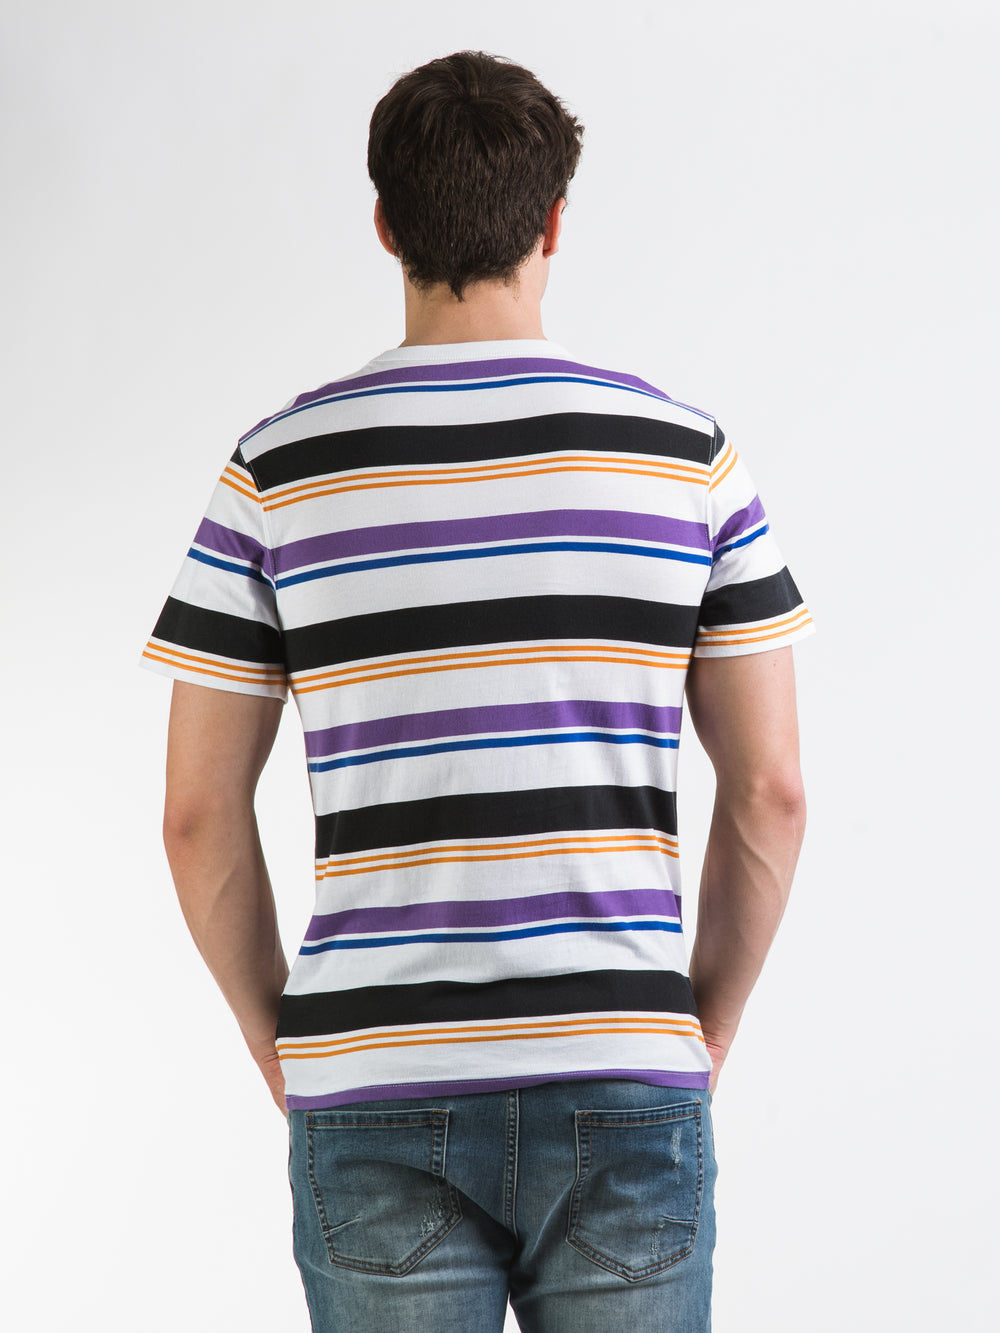 CHAMPION CLASSIC ALL OVER PRINT STRIPE T-SHIRT - CLEARANCE